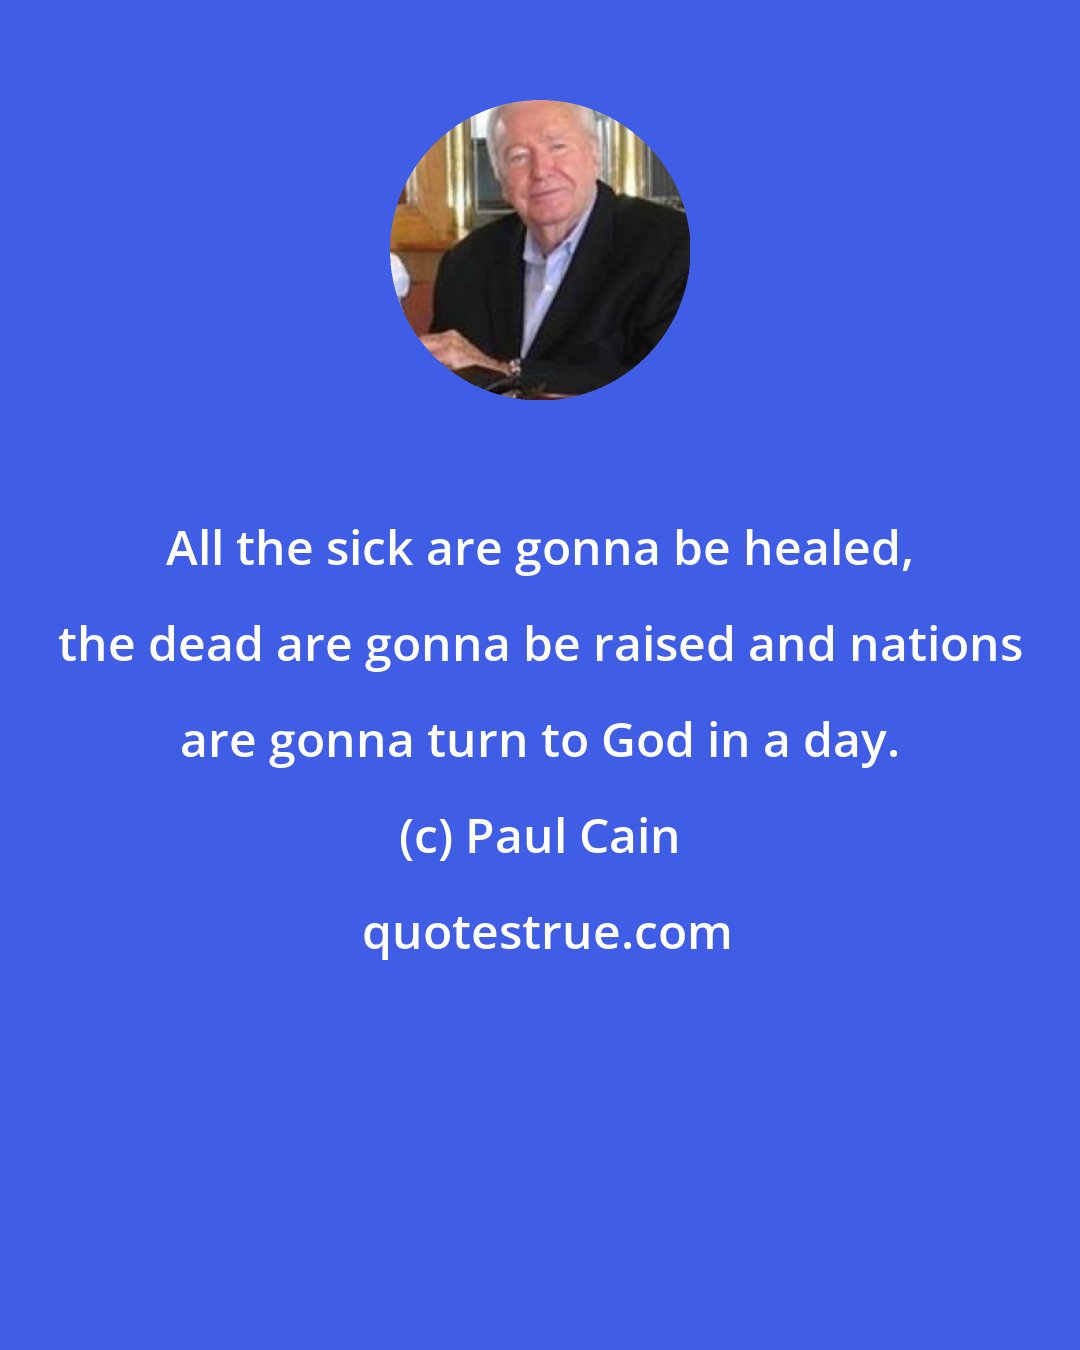 Paul Cain: All the sick are gonna be healed, the dead are gonna be raised and nations are gonna turn to God in a day.